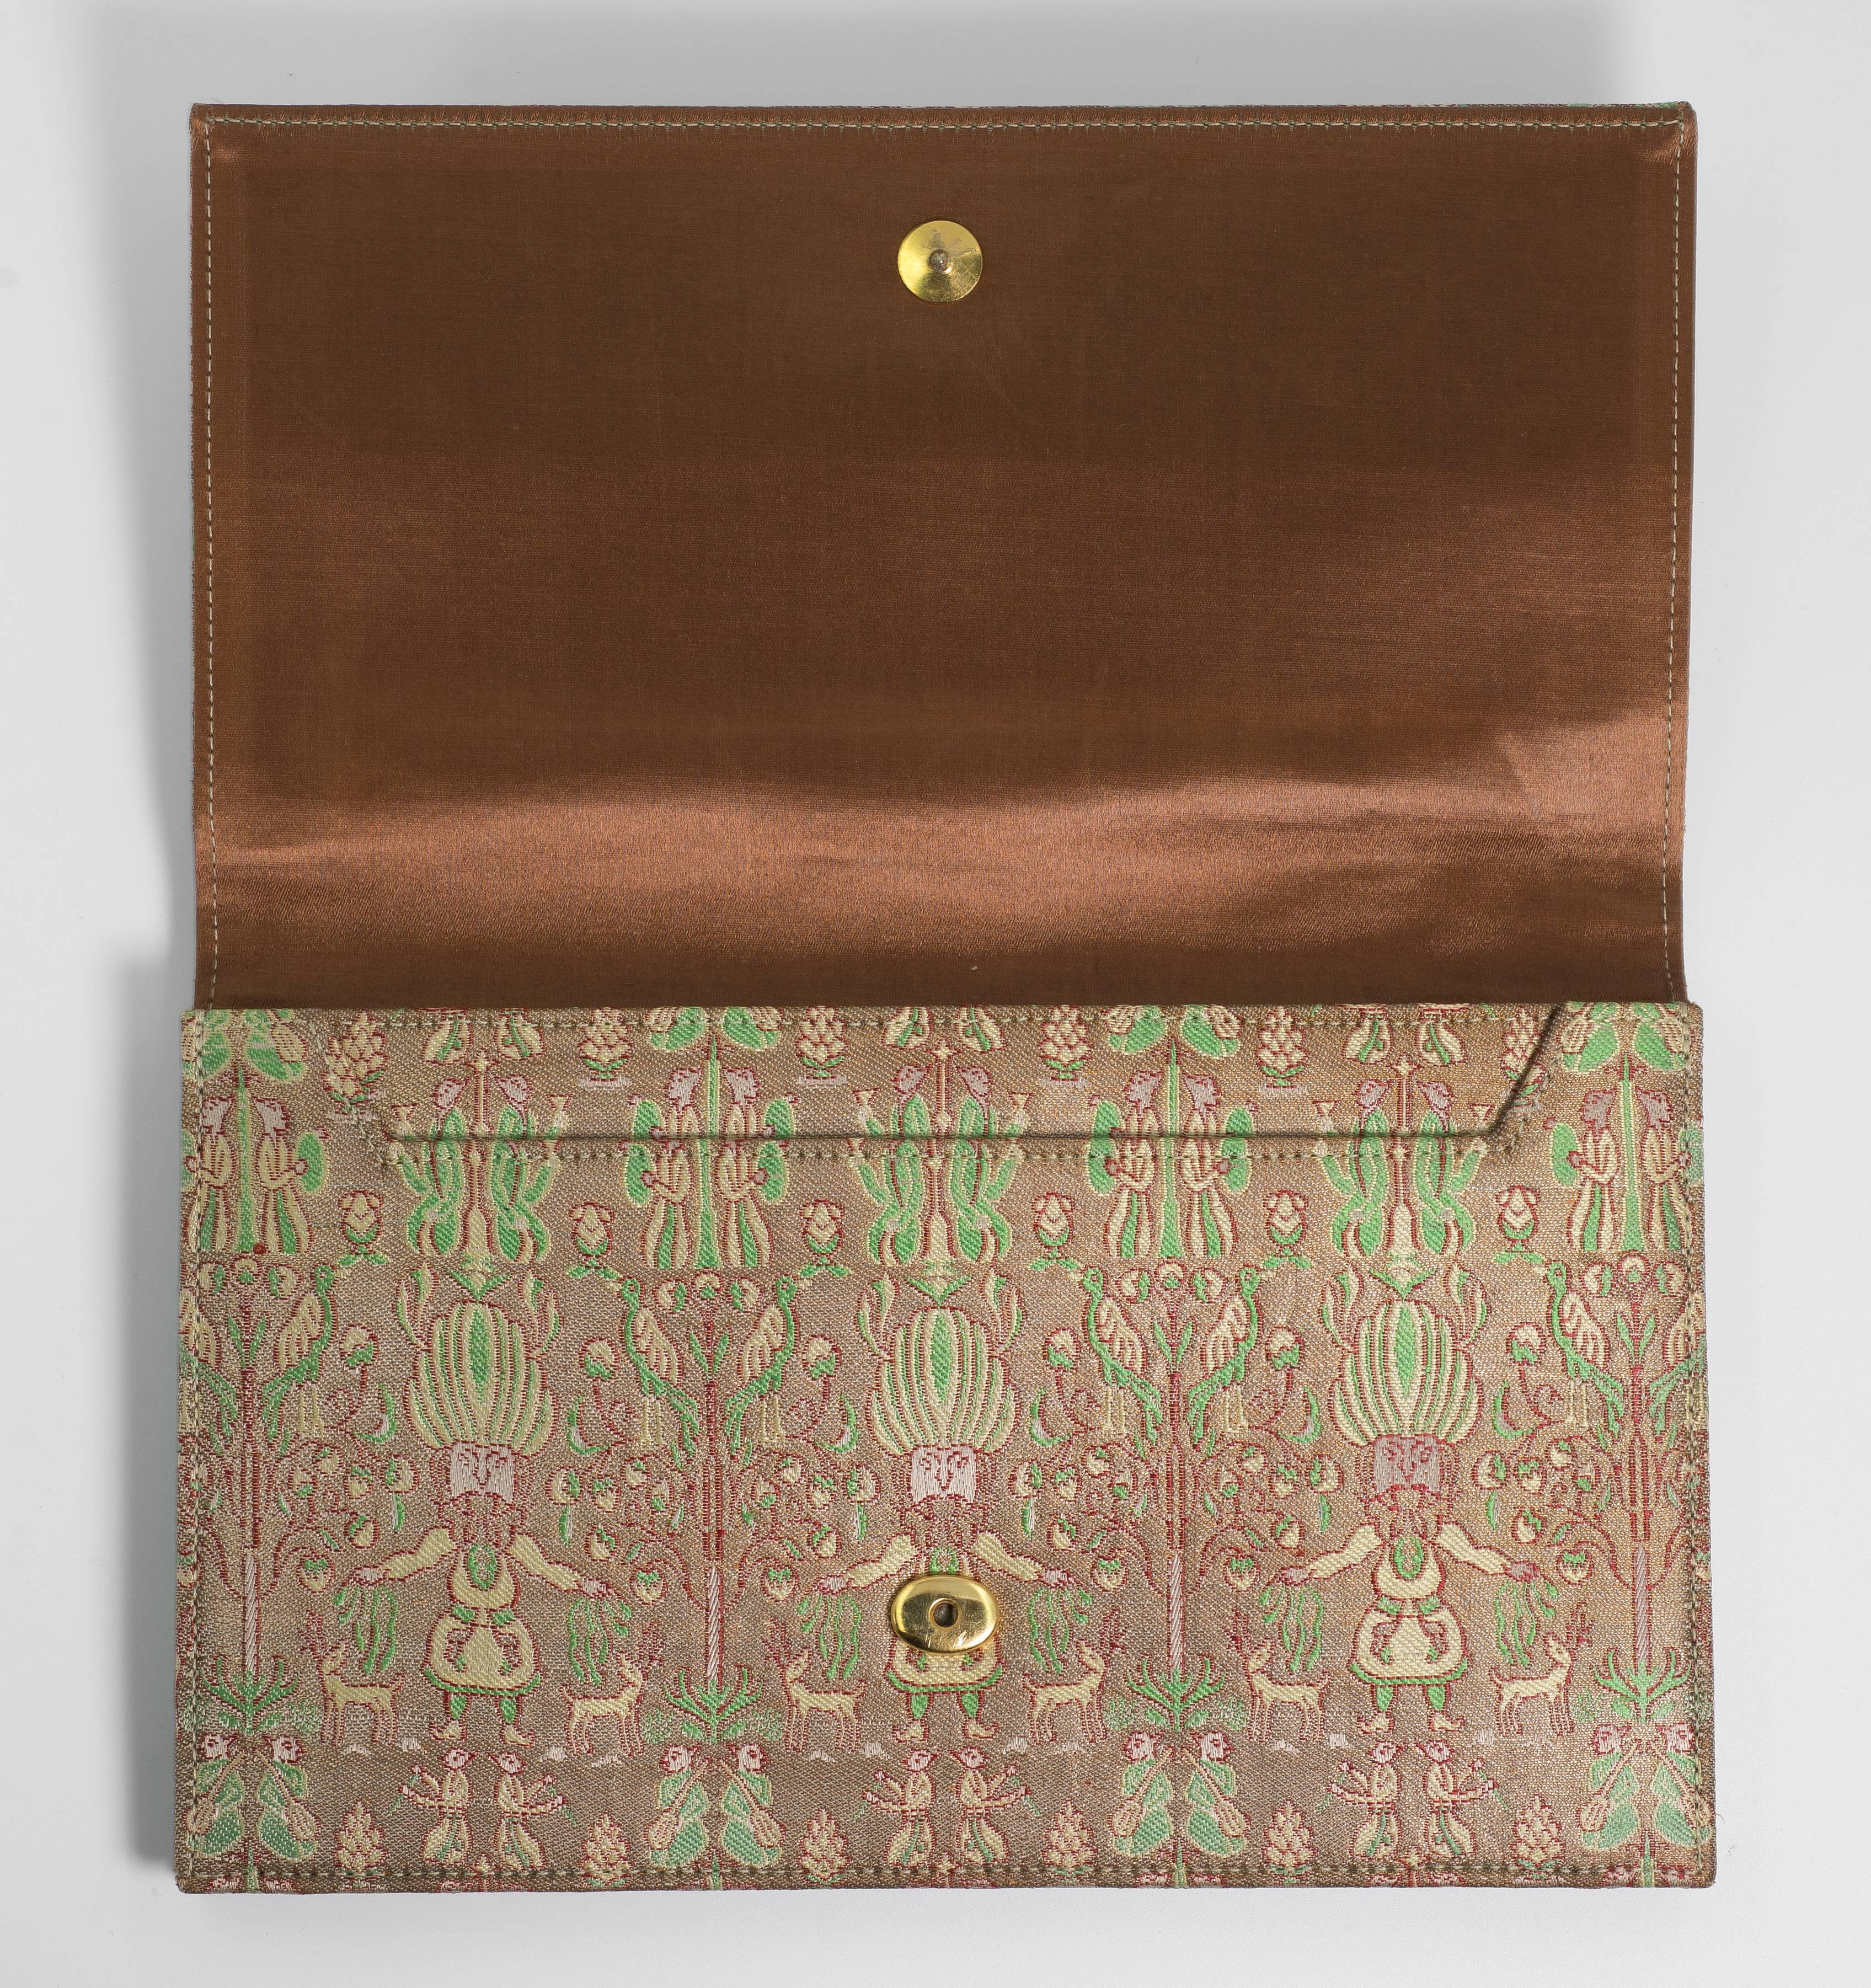 Mint condition vintage Bianchini Ferrier silk Persian themed fabric for Cartier evening pochettes made by Clive Shilton, who designed and made Princess Diana's bridal purse and shoes.

These are all offered here on 1stdibs for the first time. Made